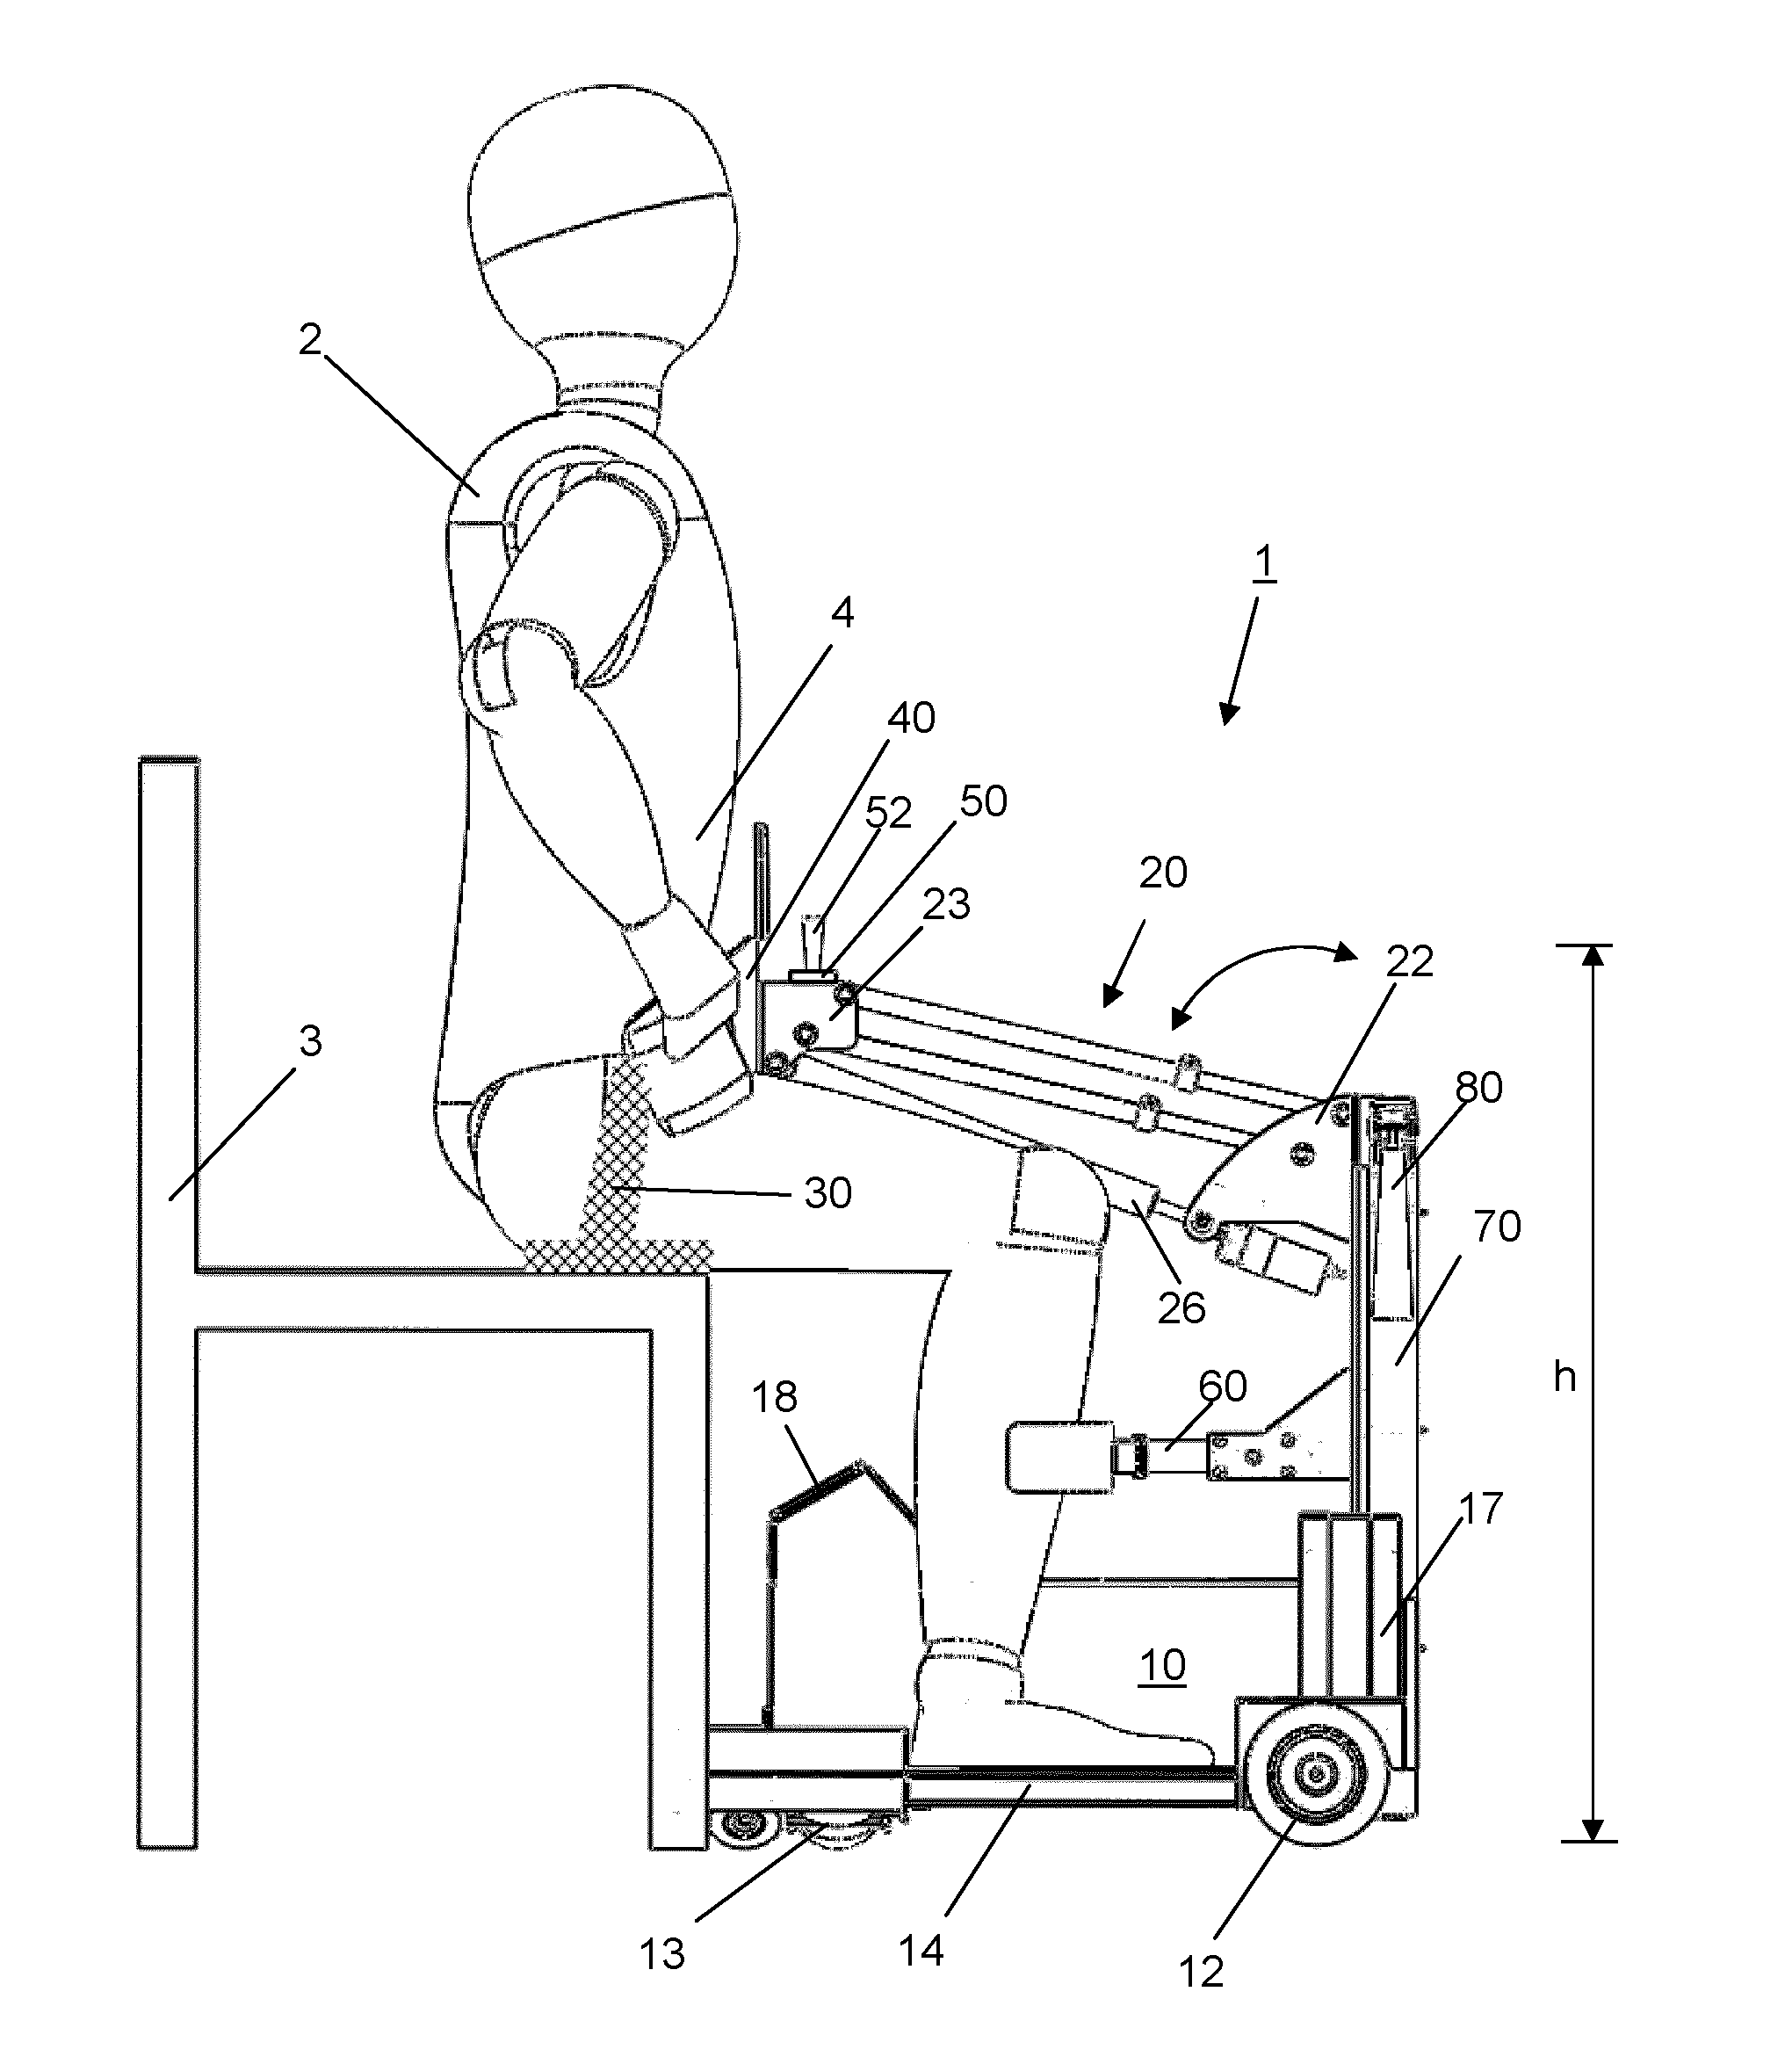 Mobility device for physically disabled people